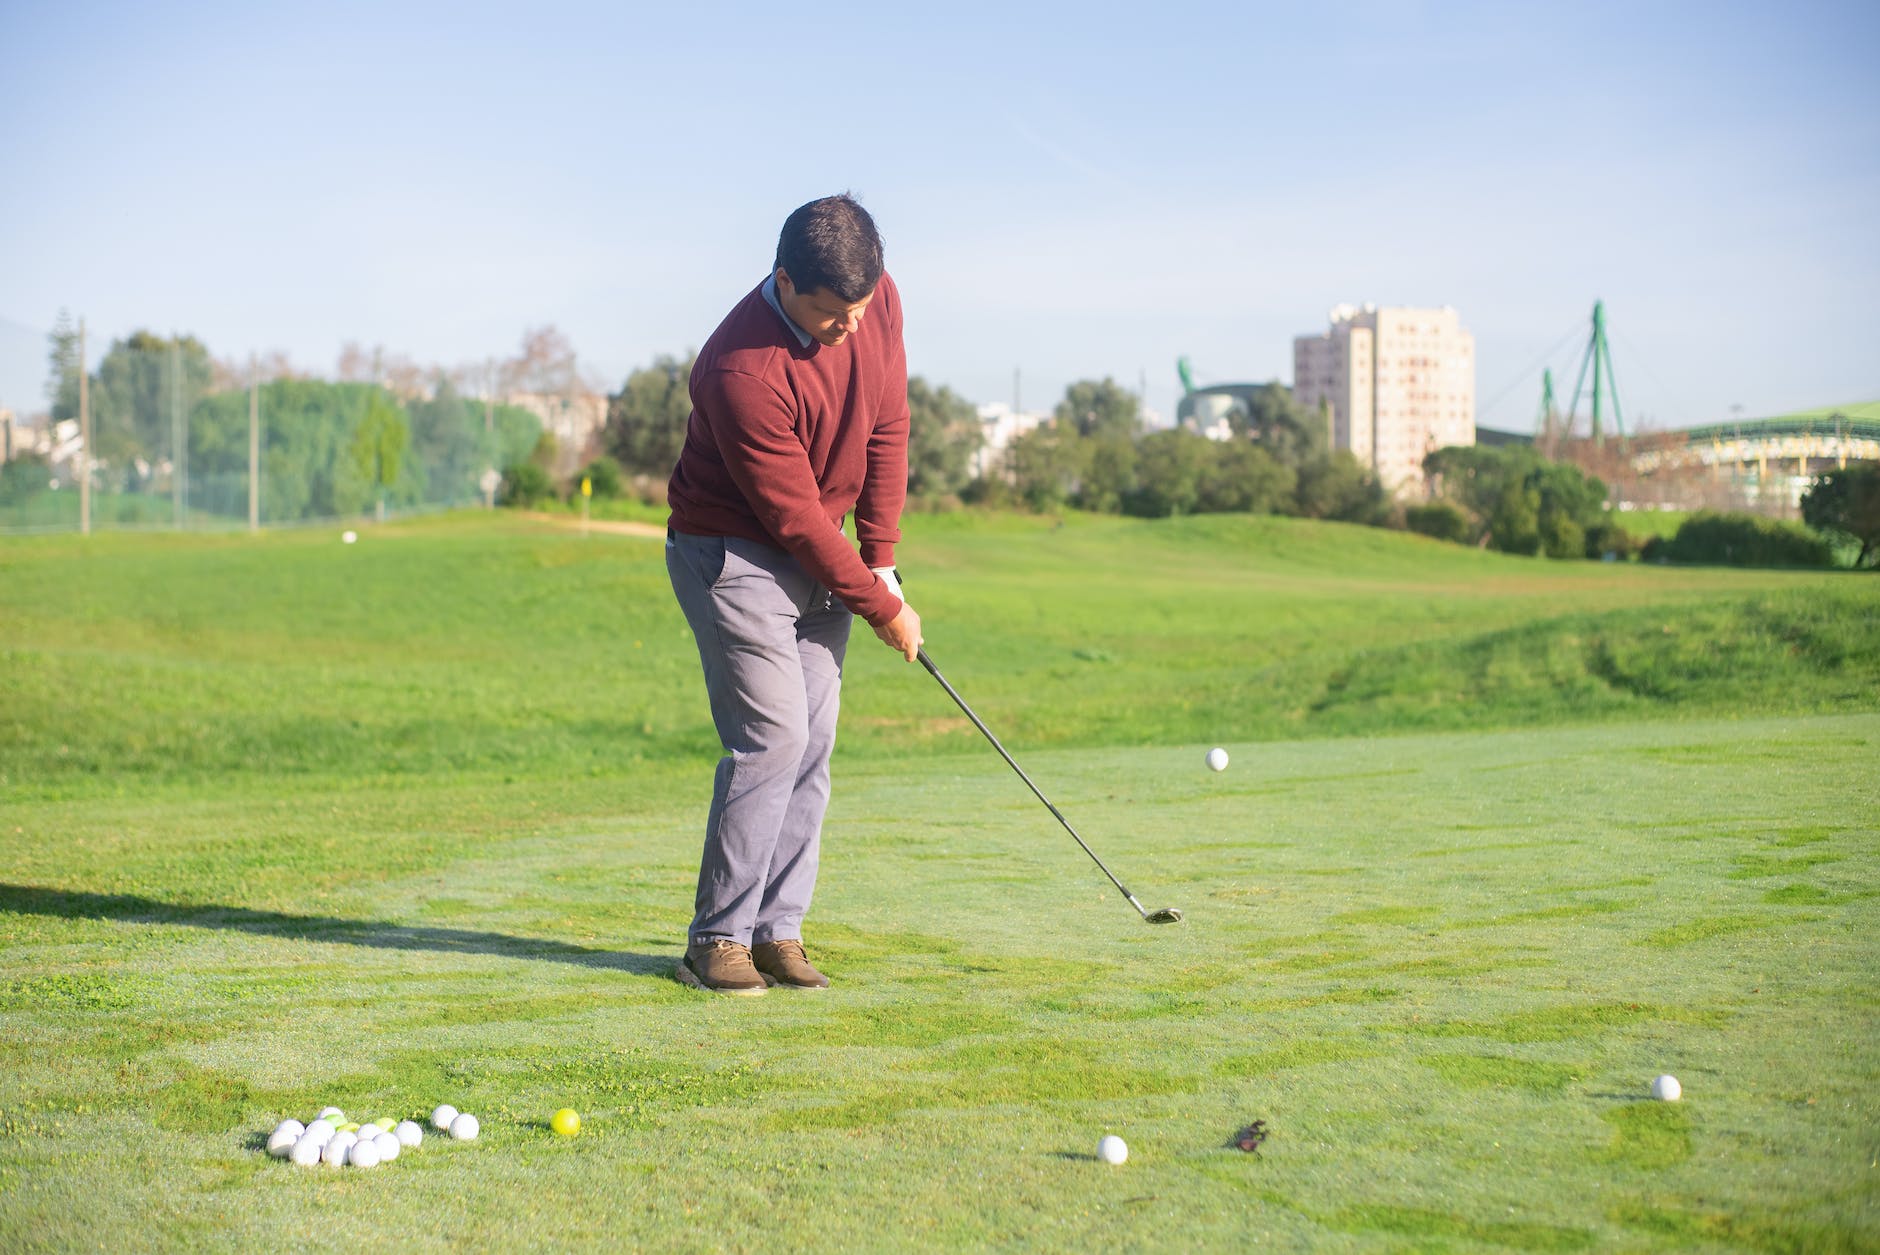 5 Ways To Master Pitching for High Handicap Golfers